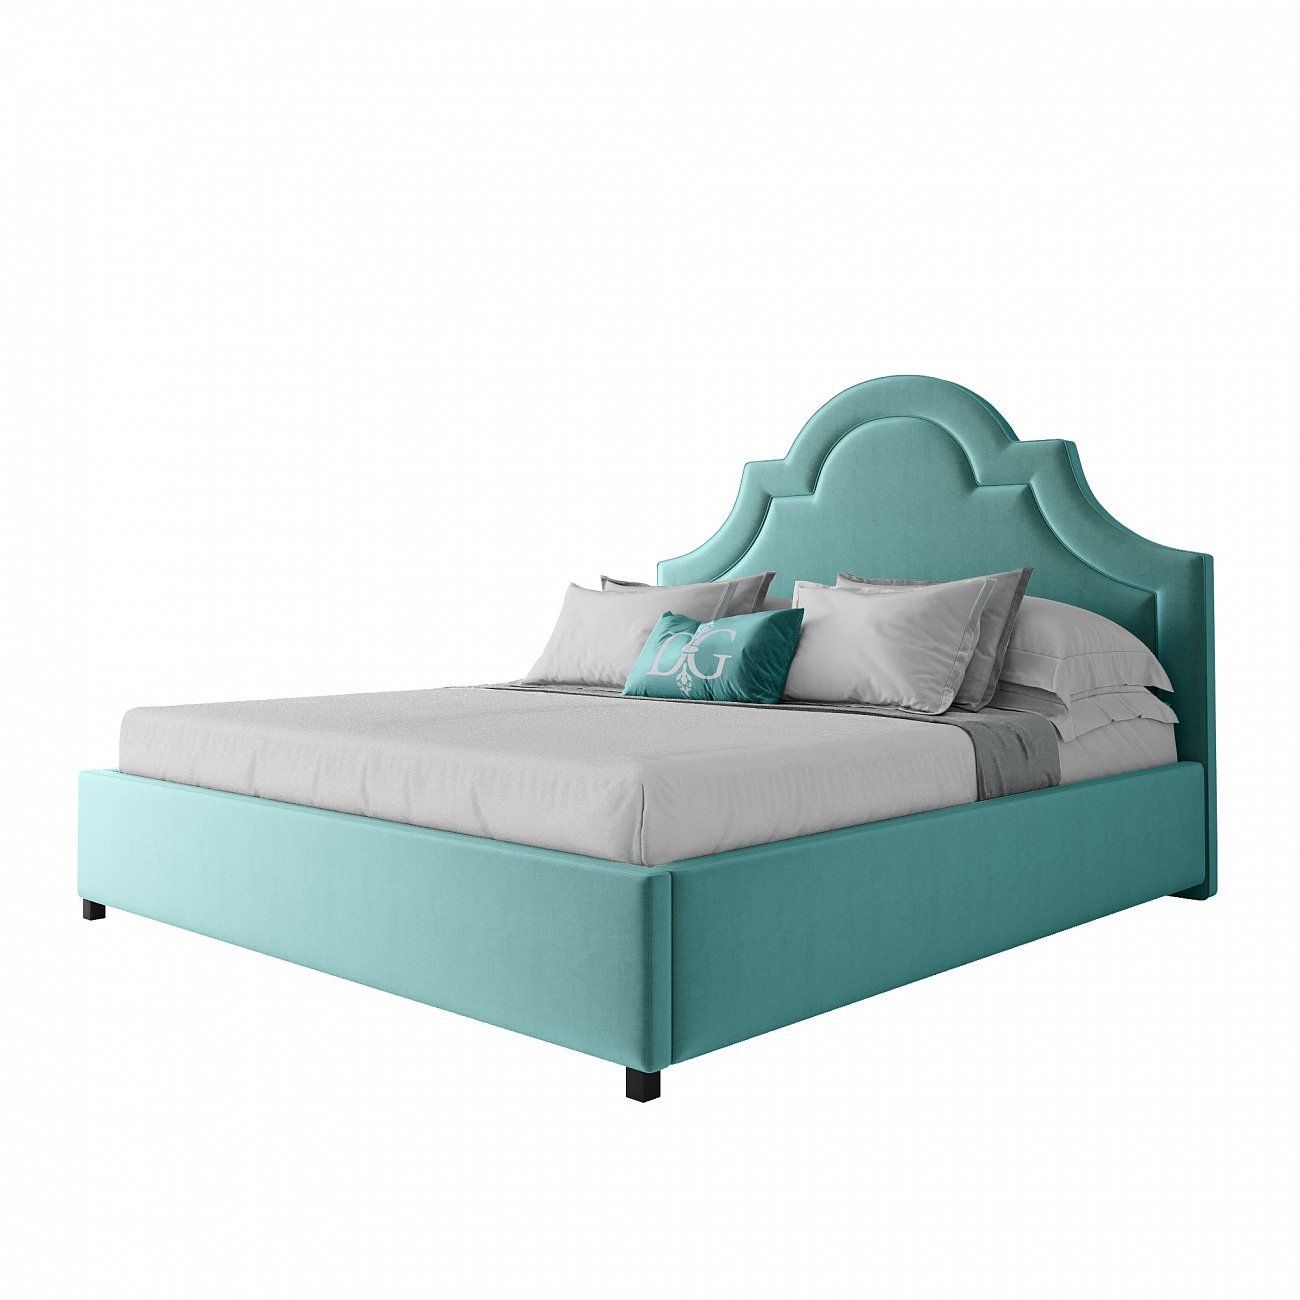 Double bed 180x200 turquoise Kennedy